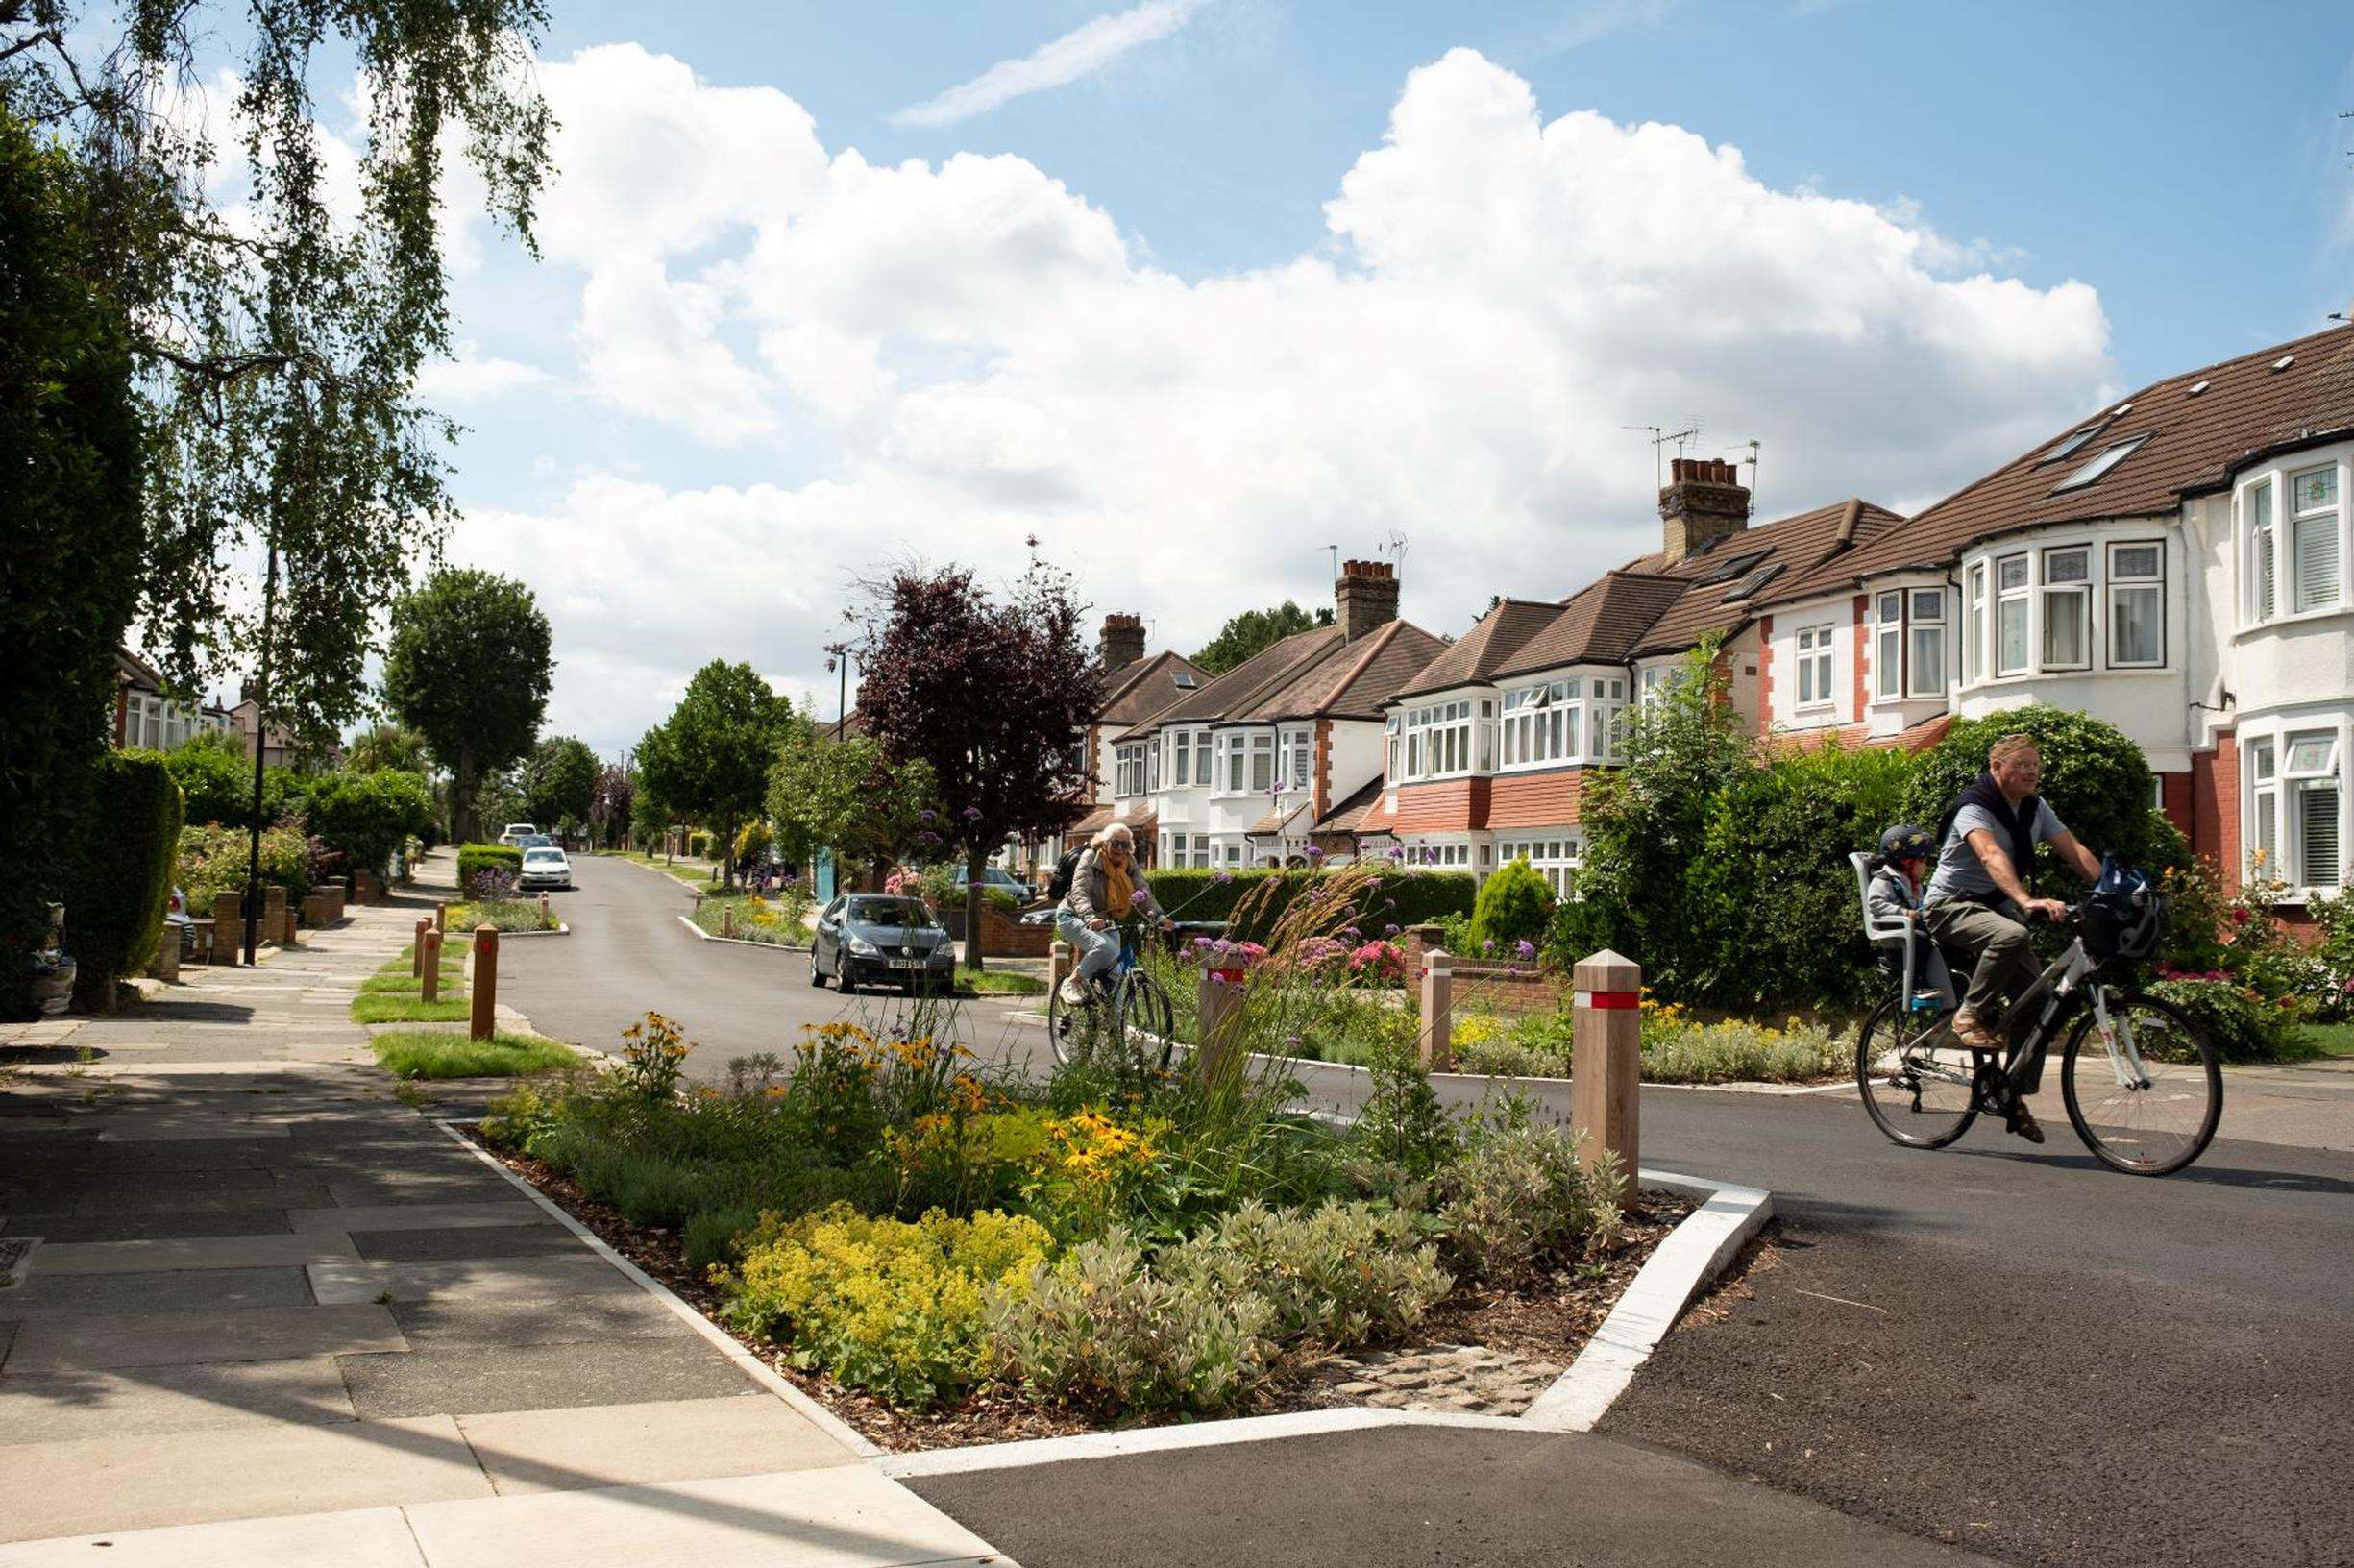 TfL`s Kendra Inman described Enfield`s rain gardens as `great - not expensive high end, but simple and effective`